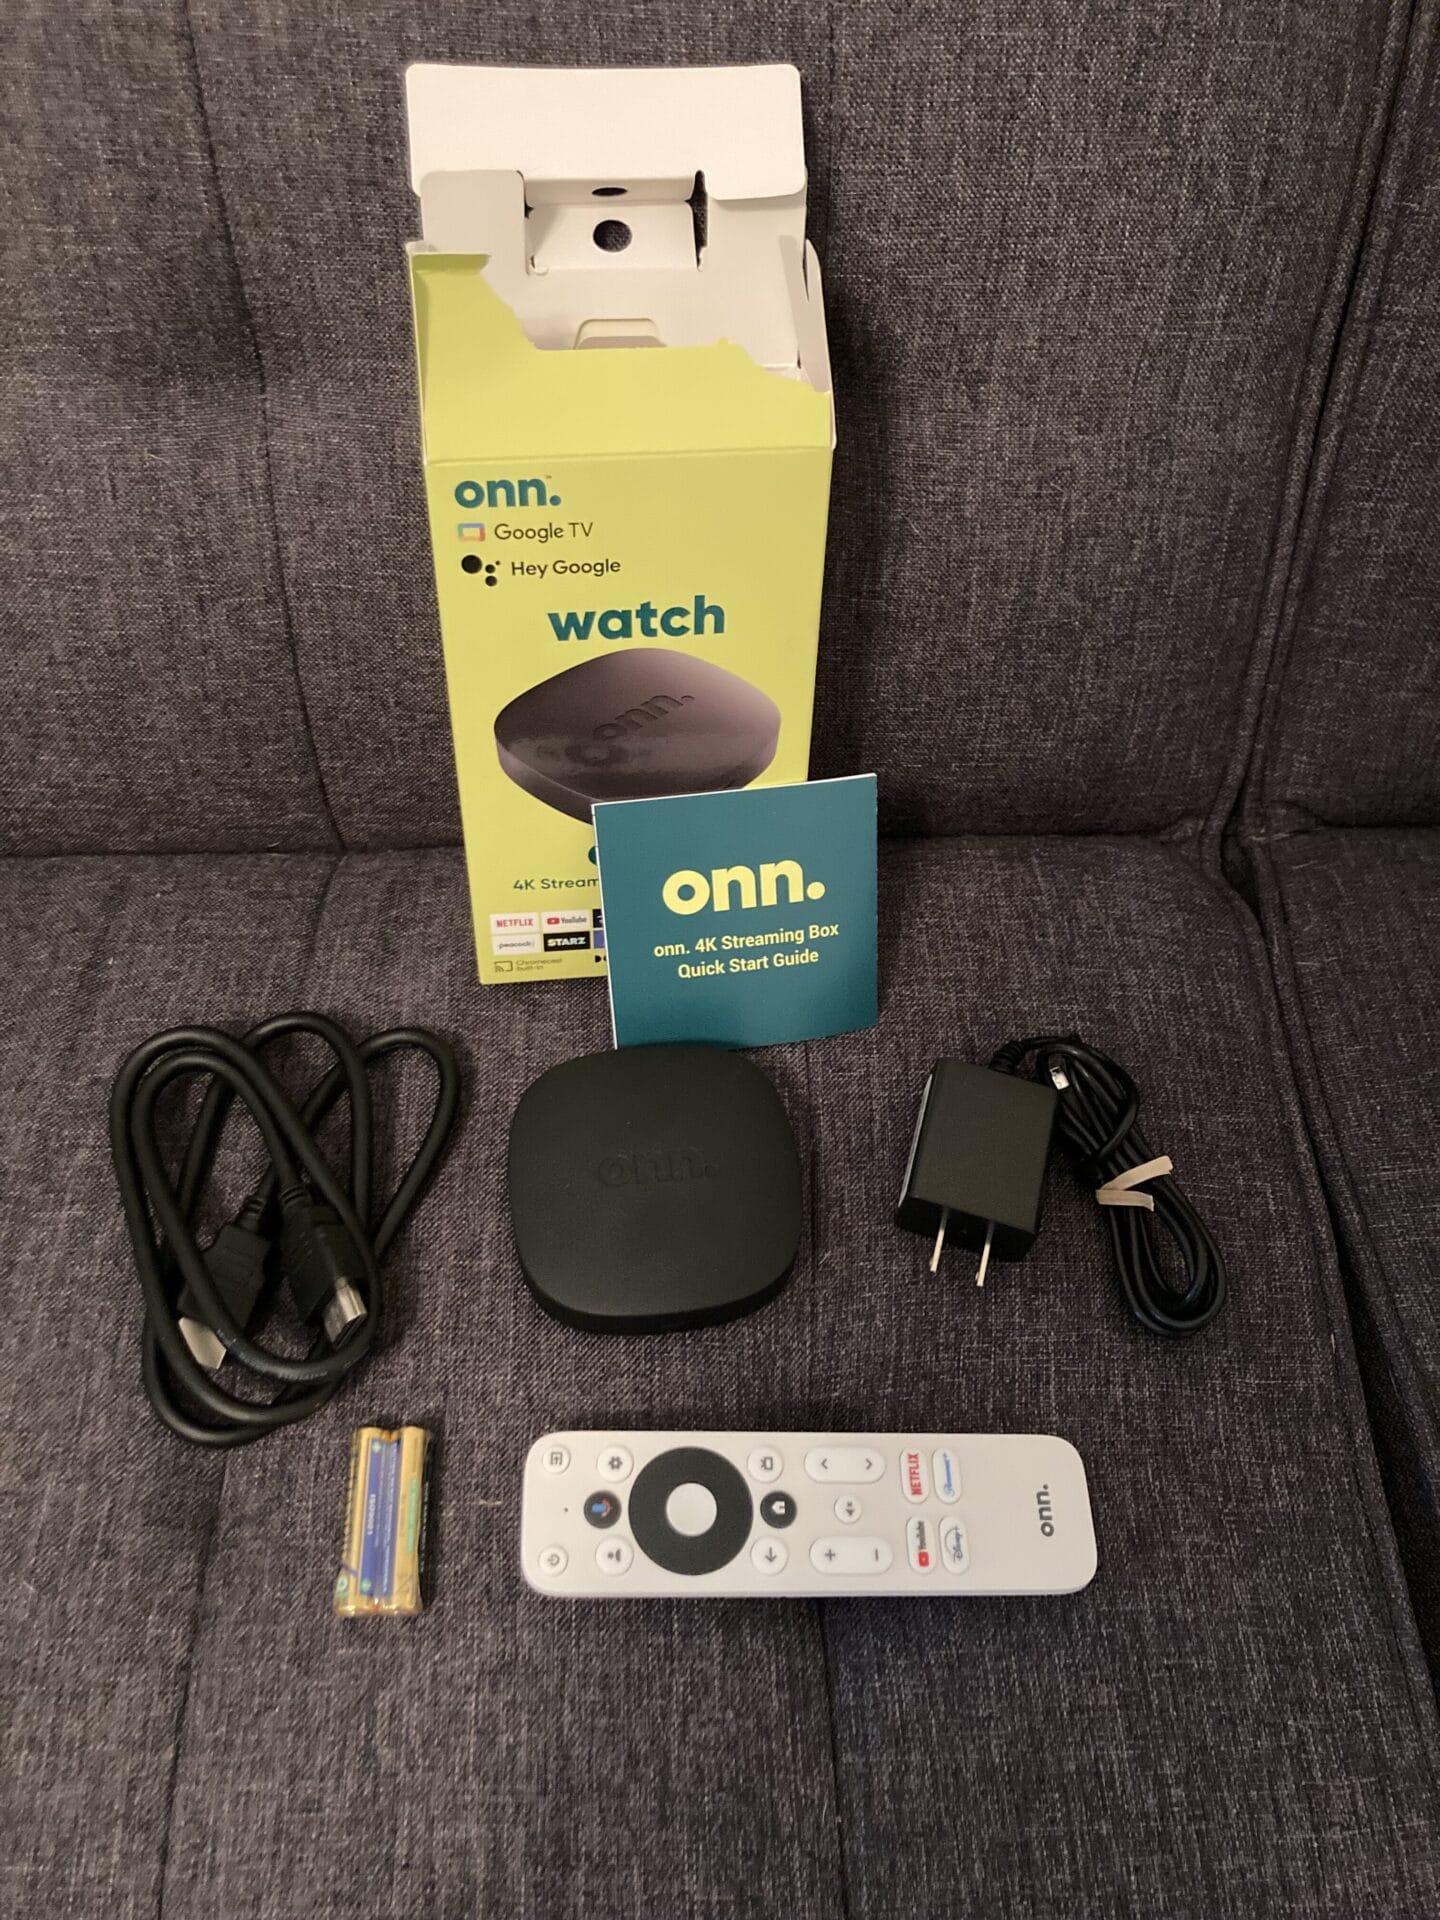 For the purpose of this review, our reviews team at IPTV Wire purchased a brand new Onn Google TV 4K Streaming Box